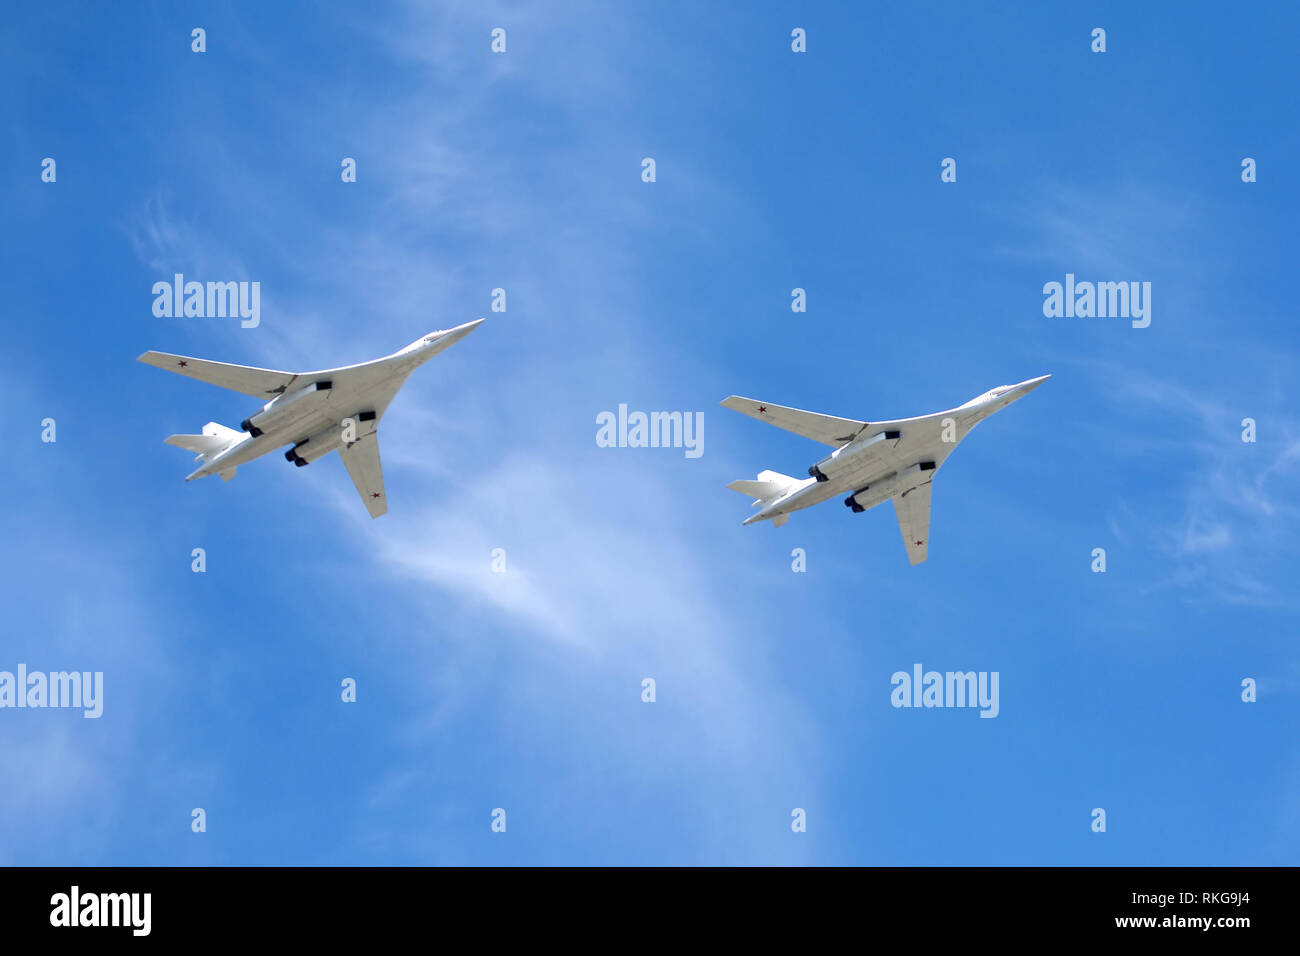 MOSCOW - MAY 9: White Swans. Two Russian military aircrafts supersonic bombers with variable sweep wing Tu-160 on parade, flight against blue sky on M Stock Photo